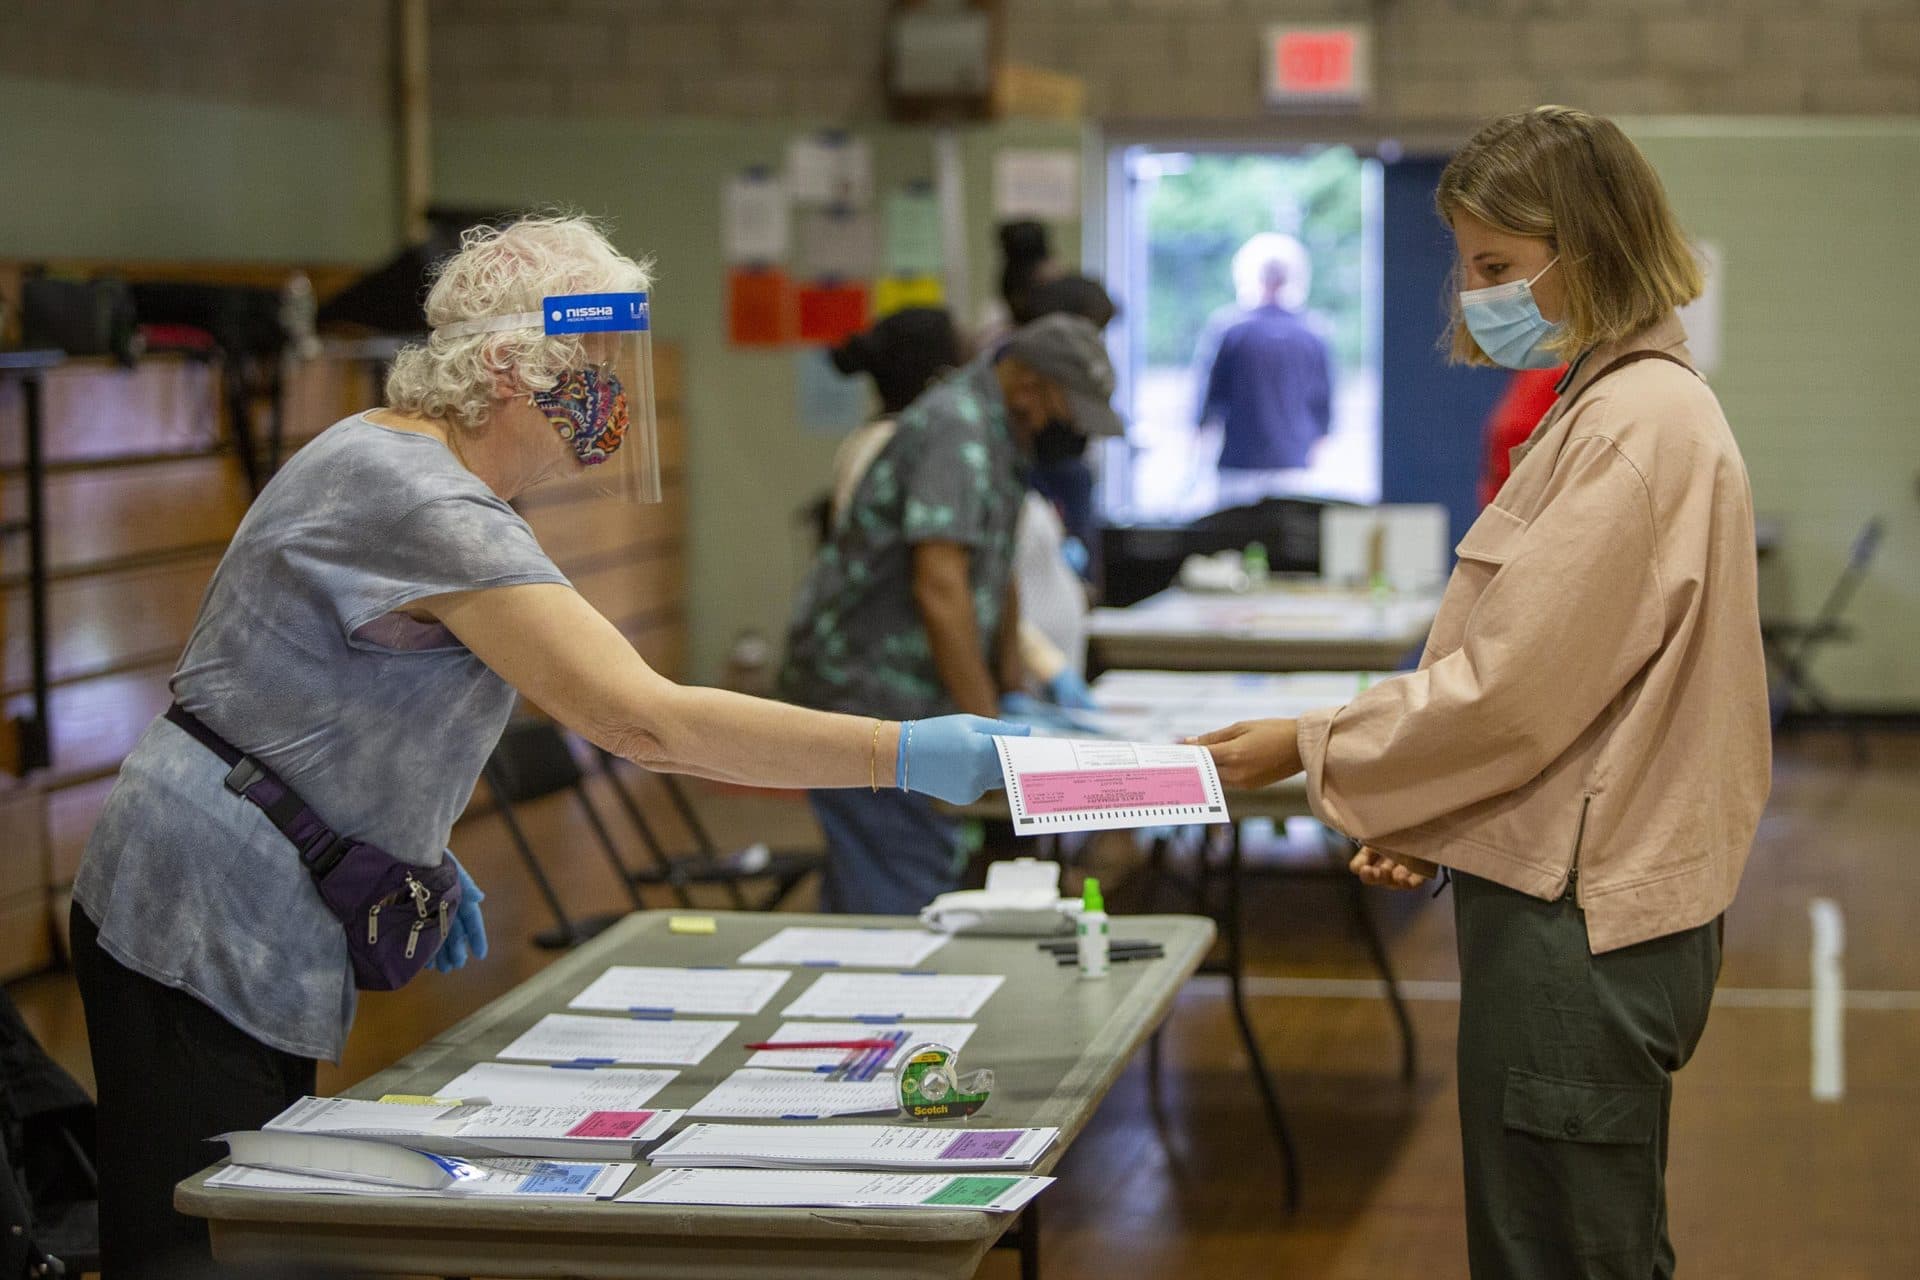 A woman collects her ballot at the polling station on Linnaean St. in Cambridge. (Robin Lubbock/WBUR)